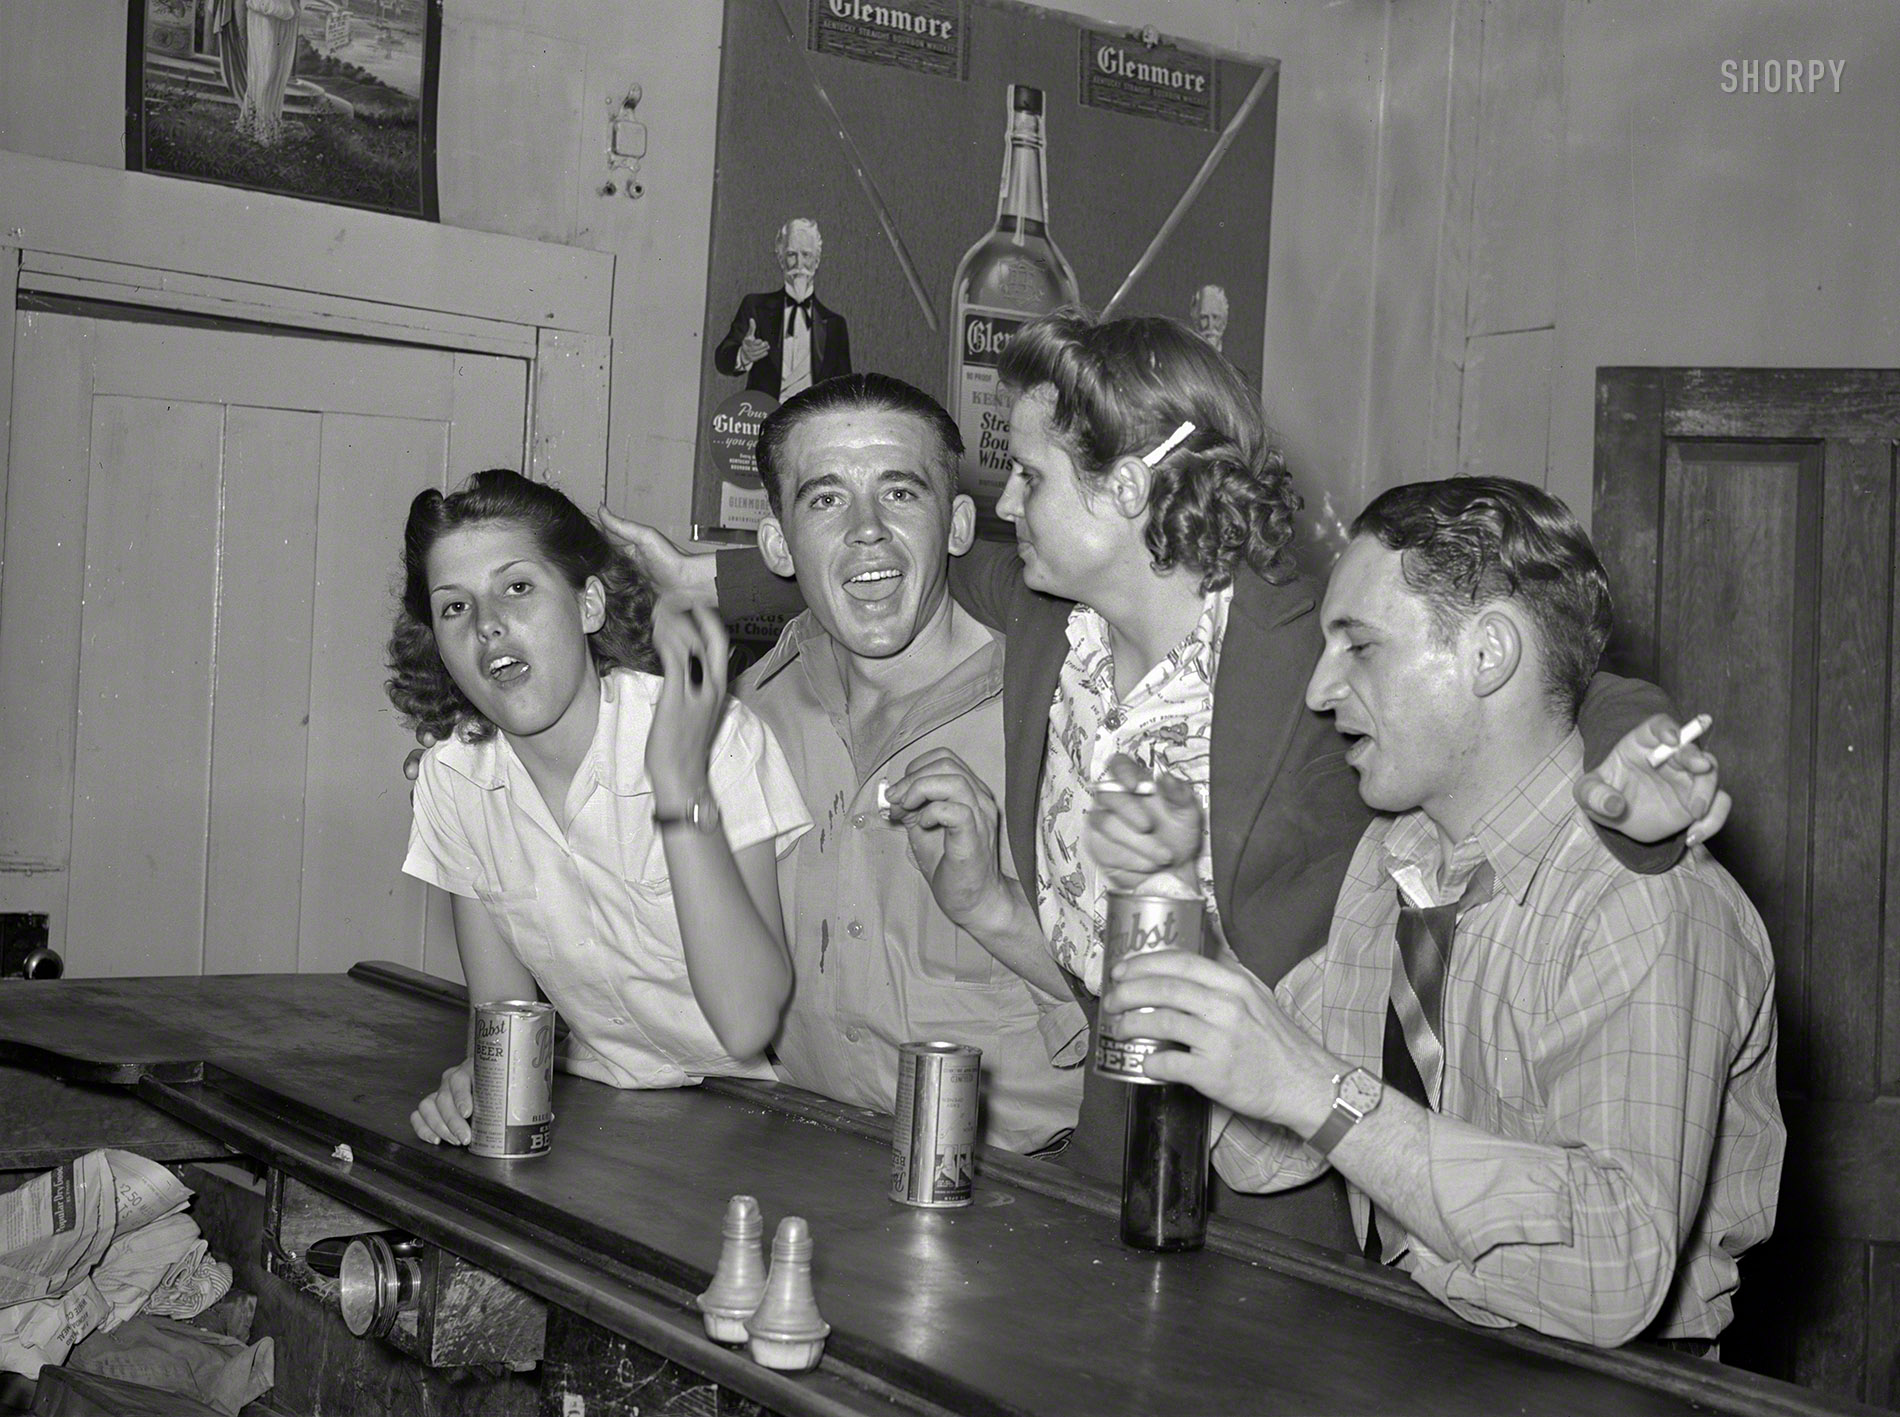 June 1940. "Youngsters in a bar at Mogollon, New Mexico." Medium format negative by Russell Lee for the Farm Security Administration. View full size.